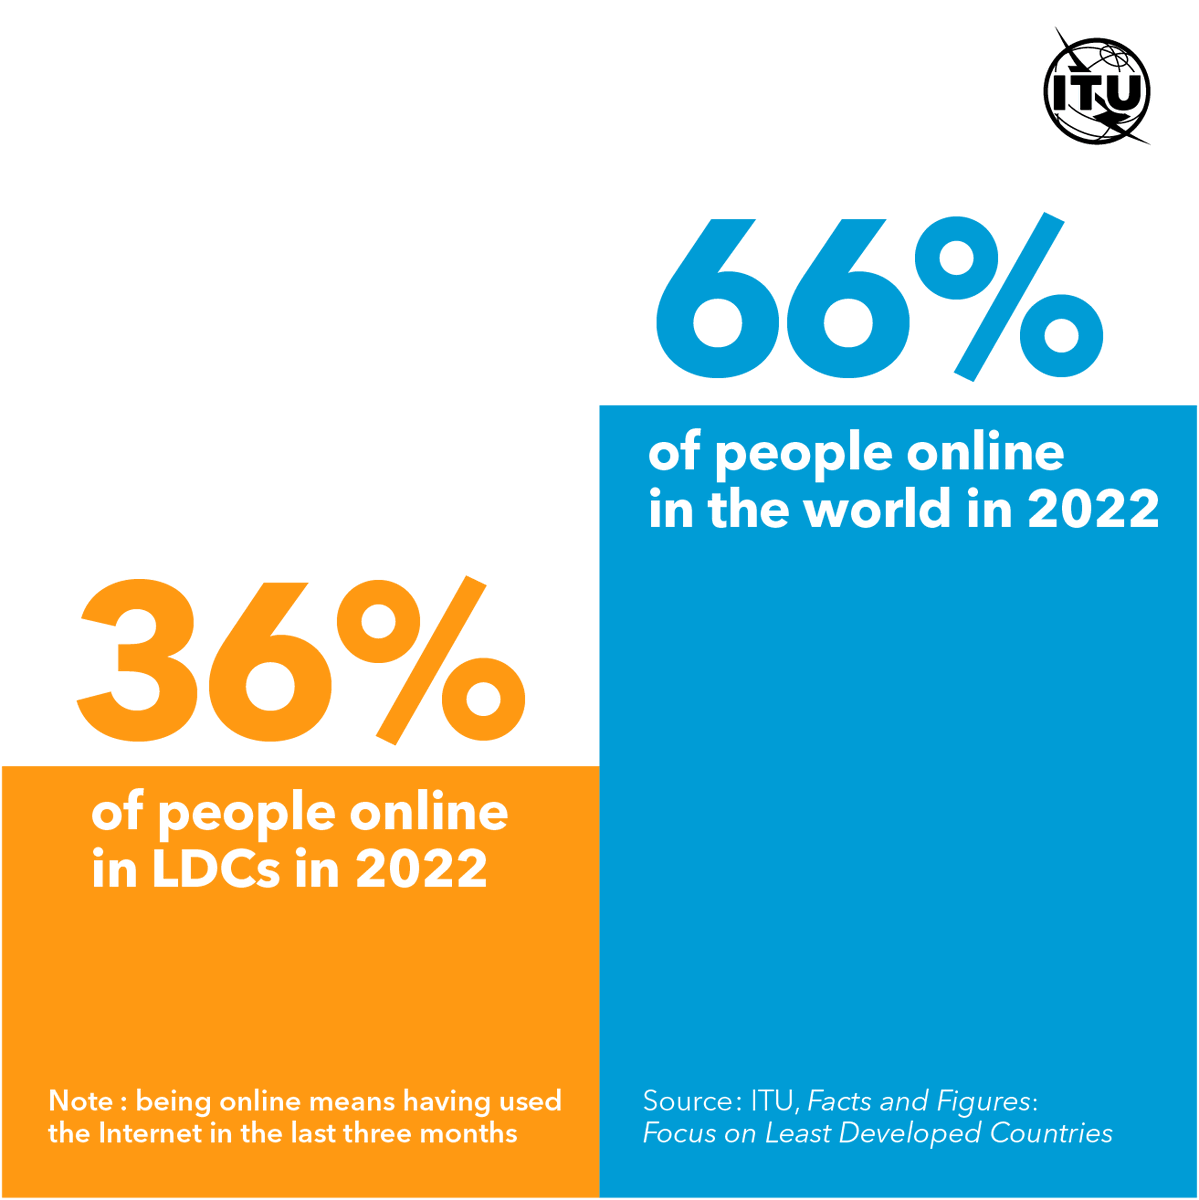 Happy WTISD! The newly launched @ITU Facts and Figures: Focus on Least Developed Countries (LDCs) sheds light on some of the latest trends and #connectivity developments in #LDCs. Download the report to explore more #ITUdata on LDCs.
itu.int/factsandfigure…